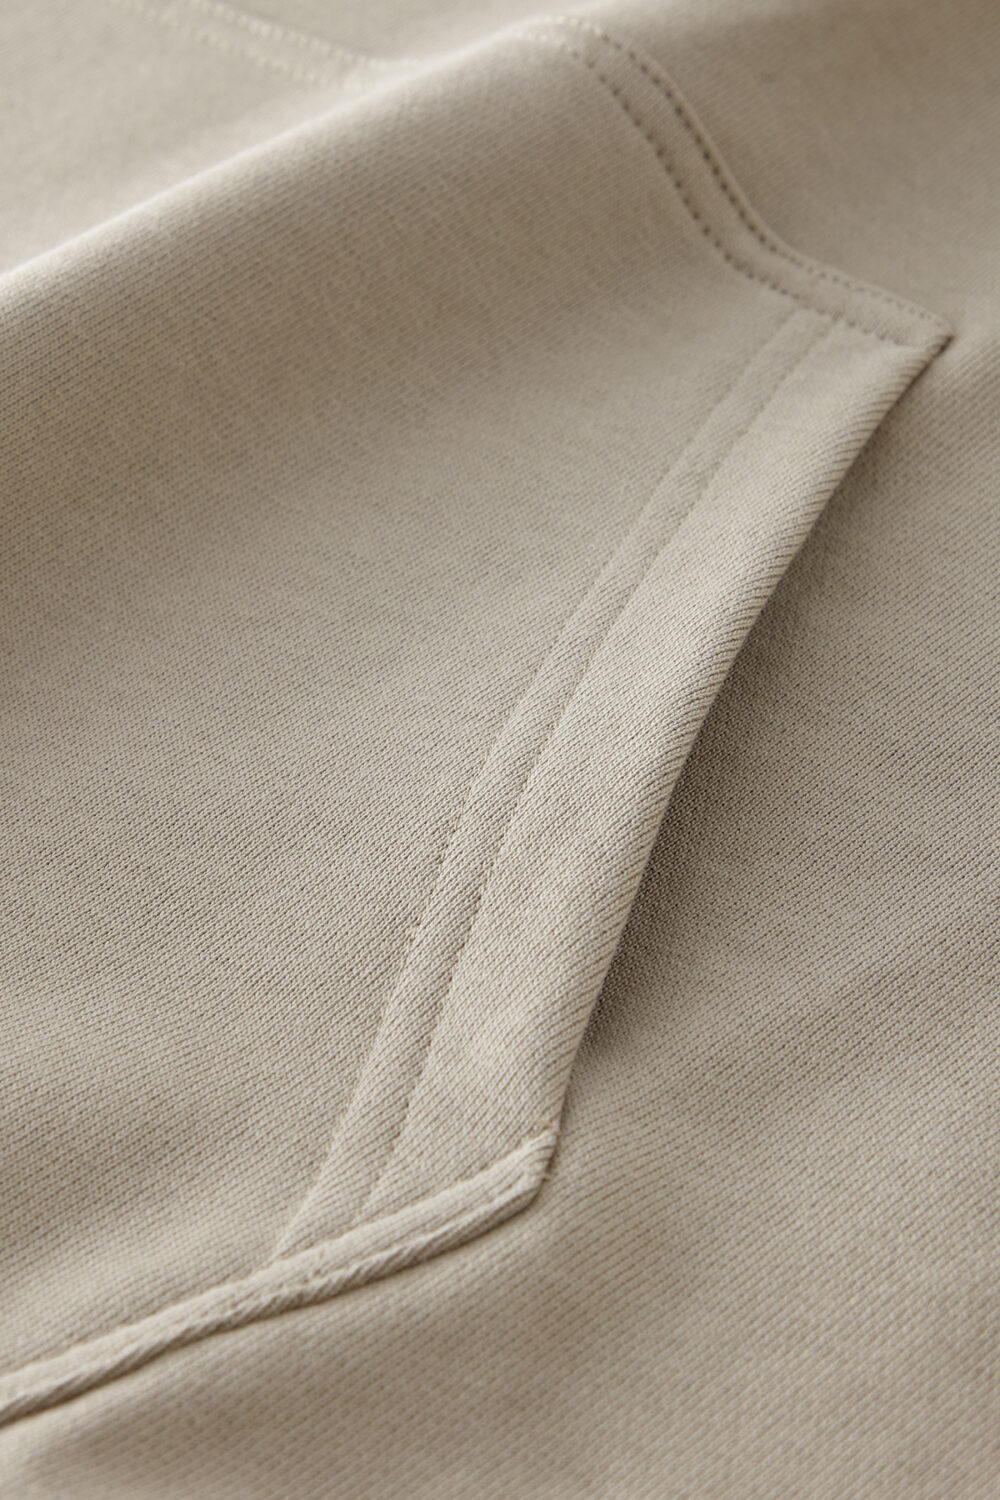 #2216 Cotton 400Gsm Thick Oversized French Terry Hoodie 18